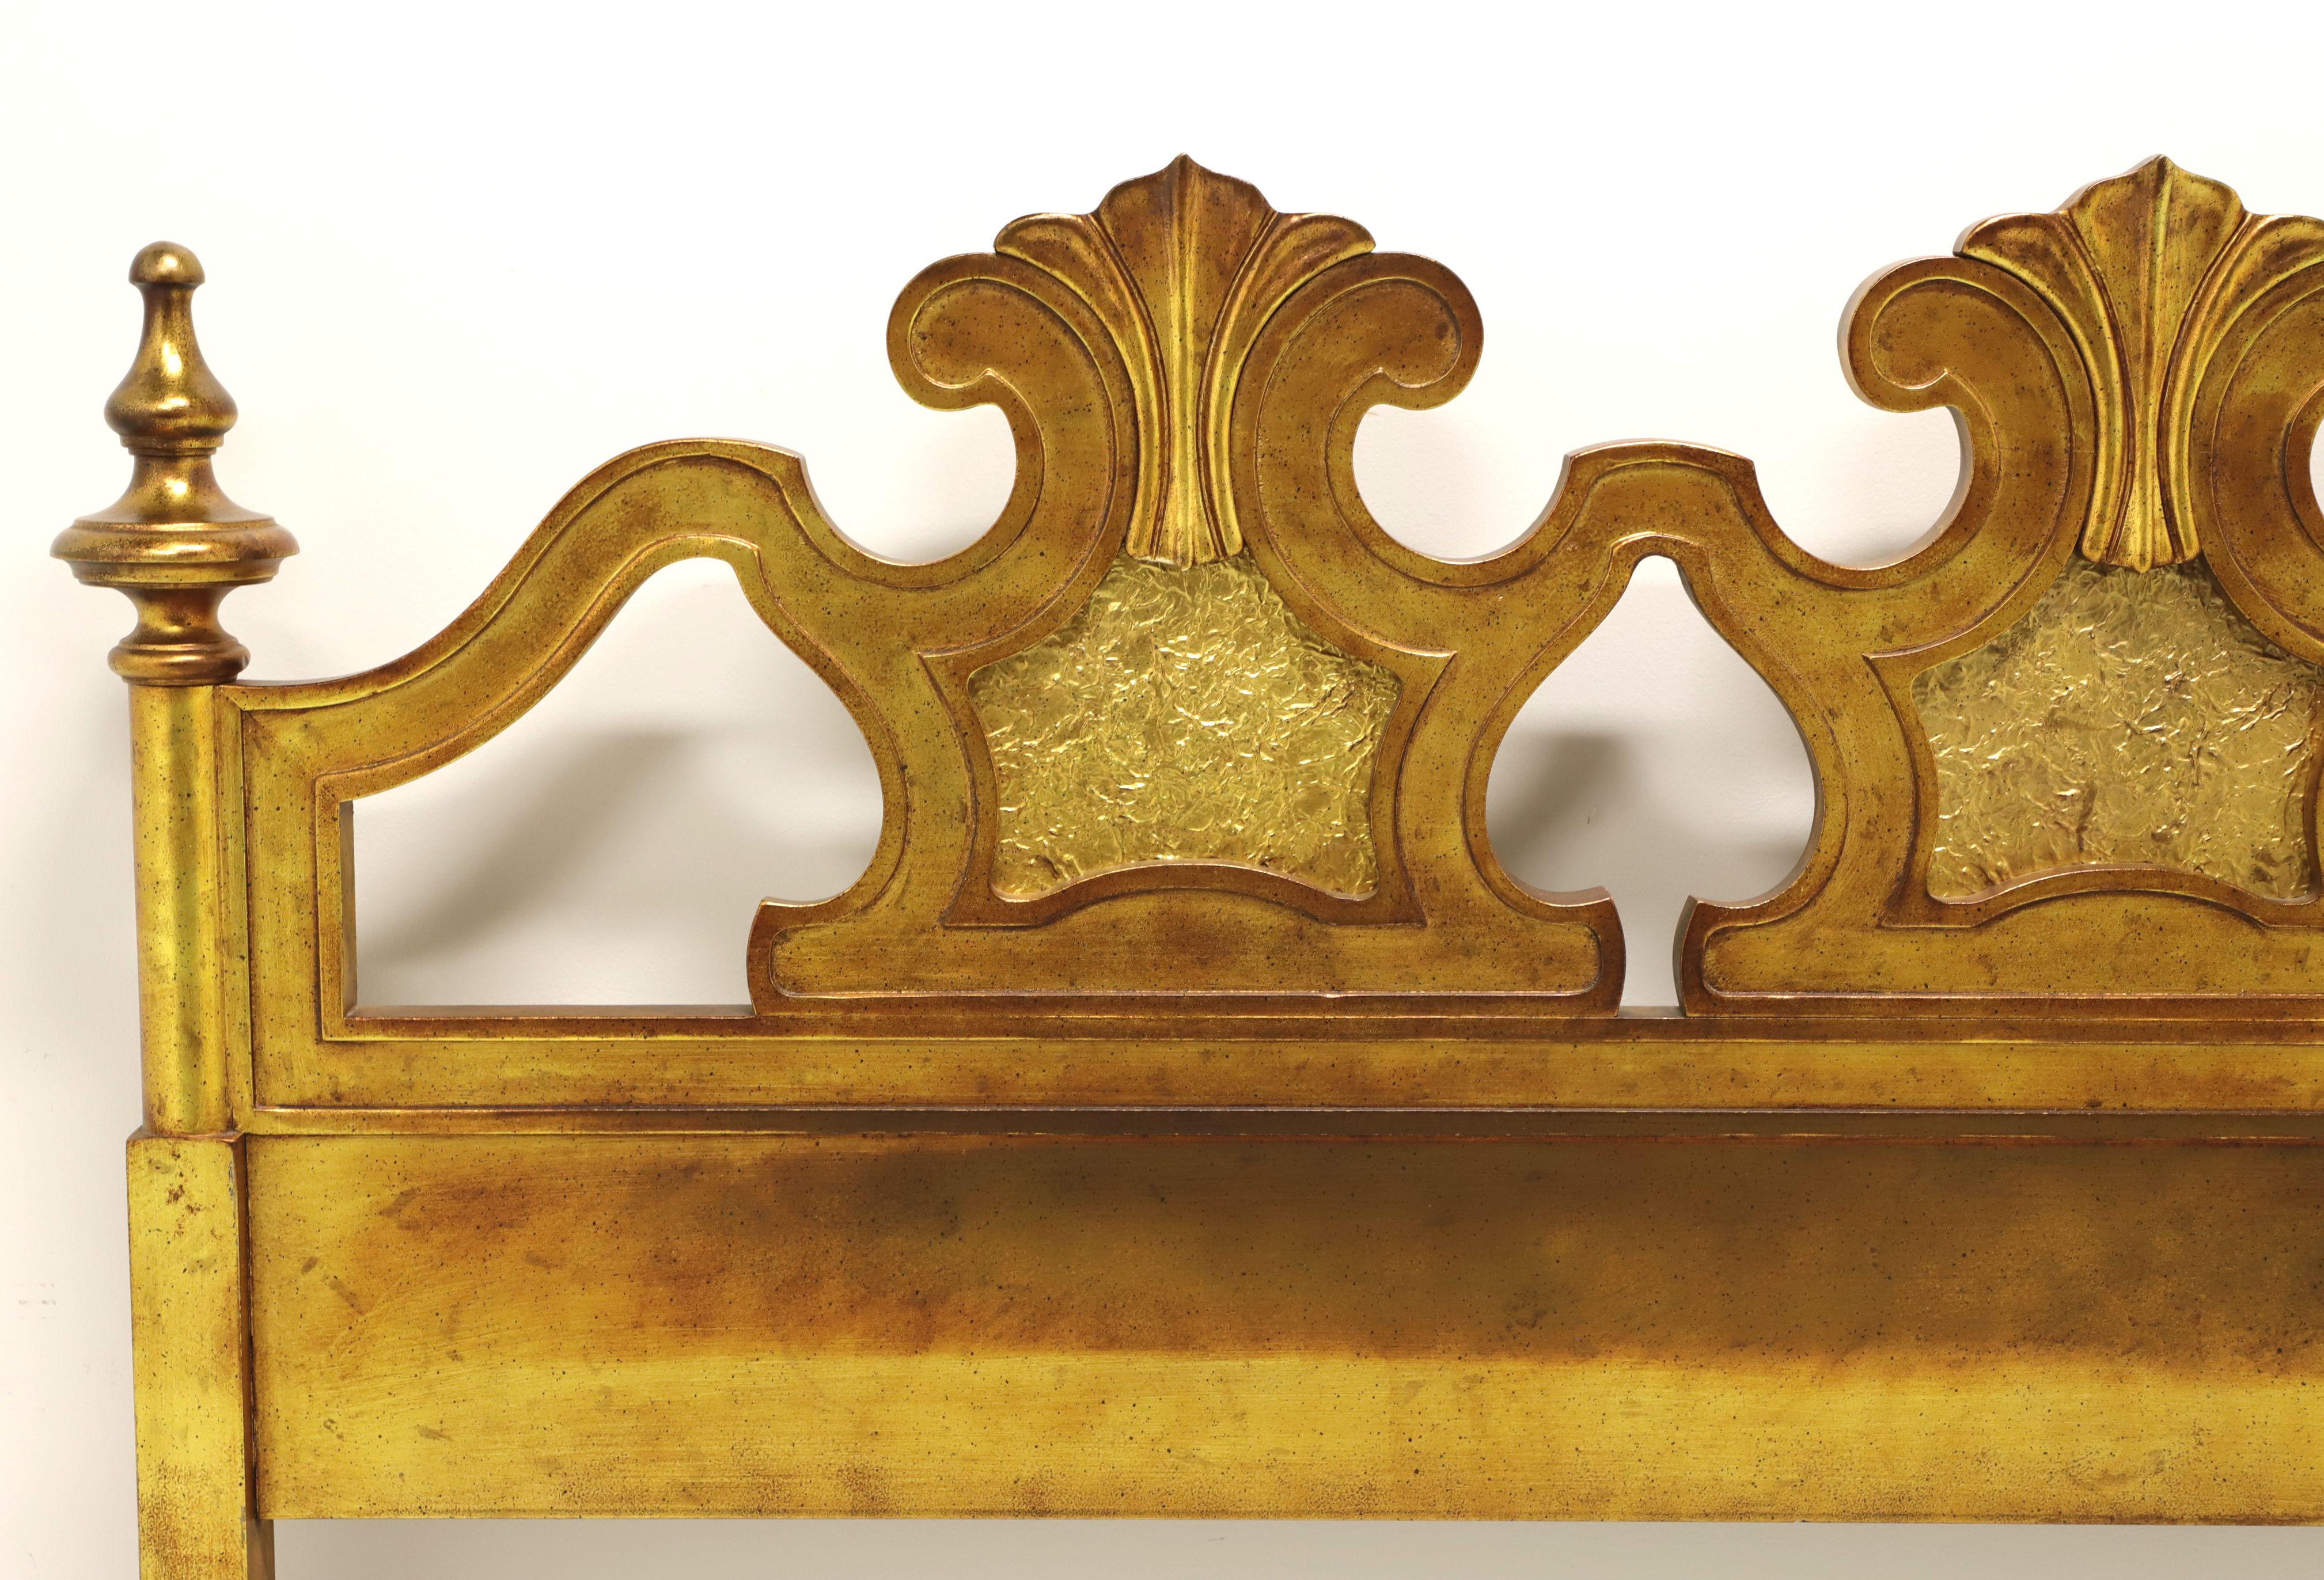 A Spanish style king size headboard by Drexel, from their Velero Collection. Solid hardwood with antiqued gold finish with some lighter and darker tones of gold. Features three decorative carvings with a crinkled foil effect to center of each and